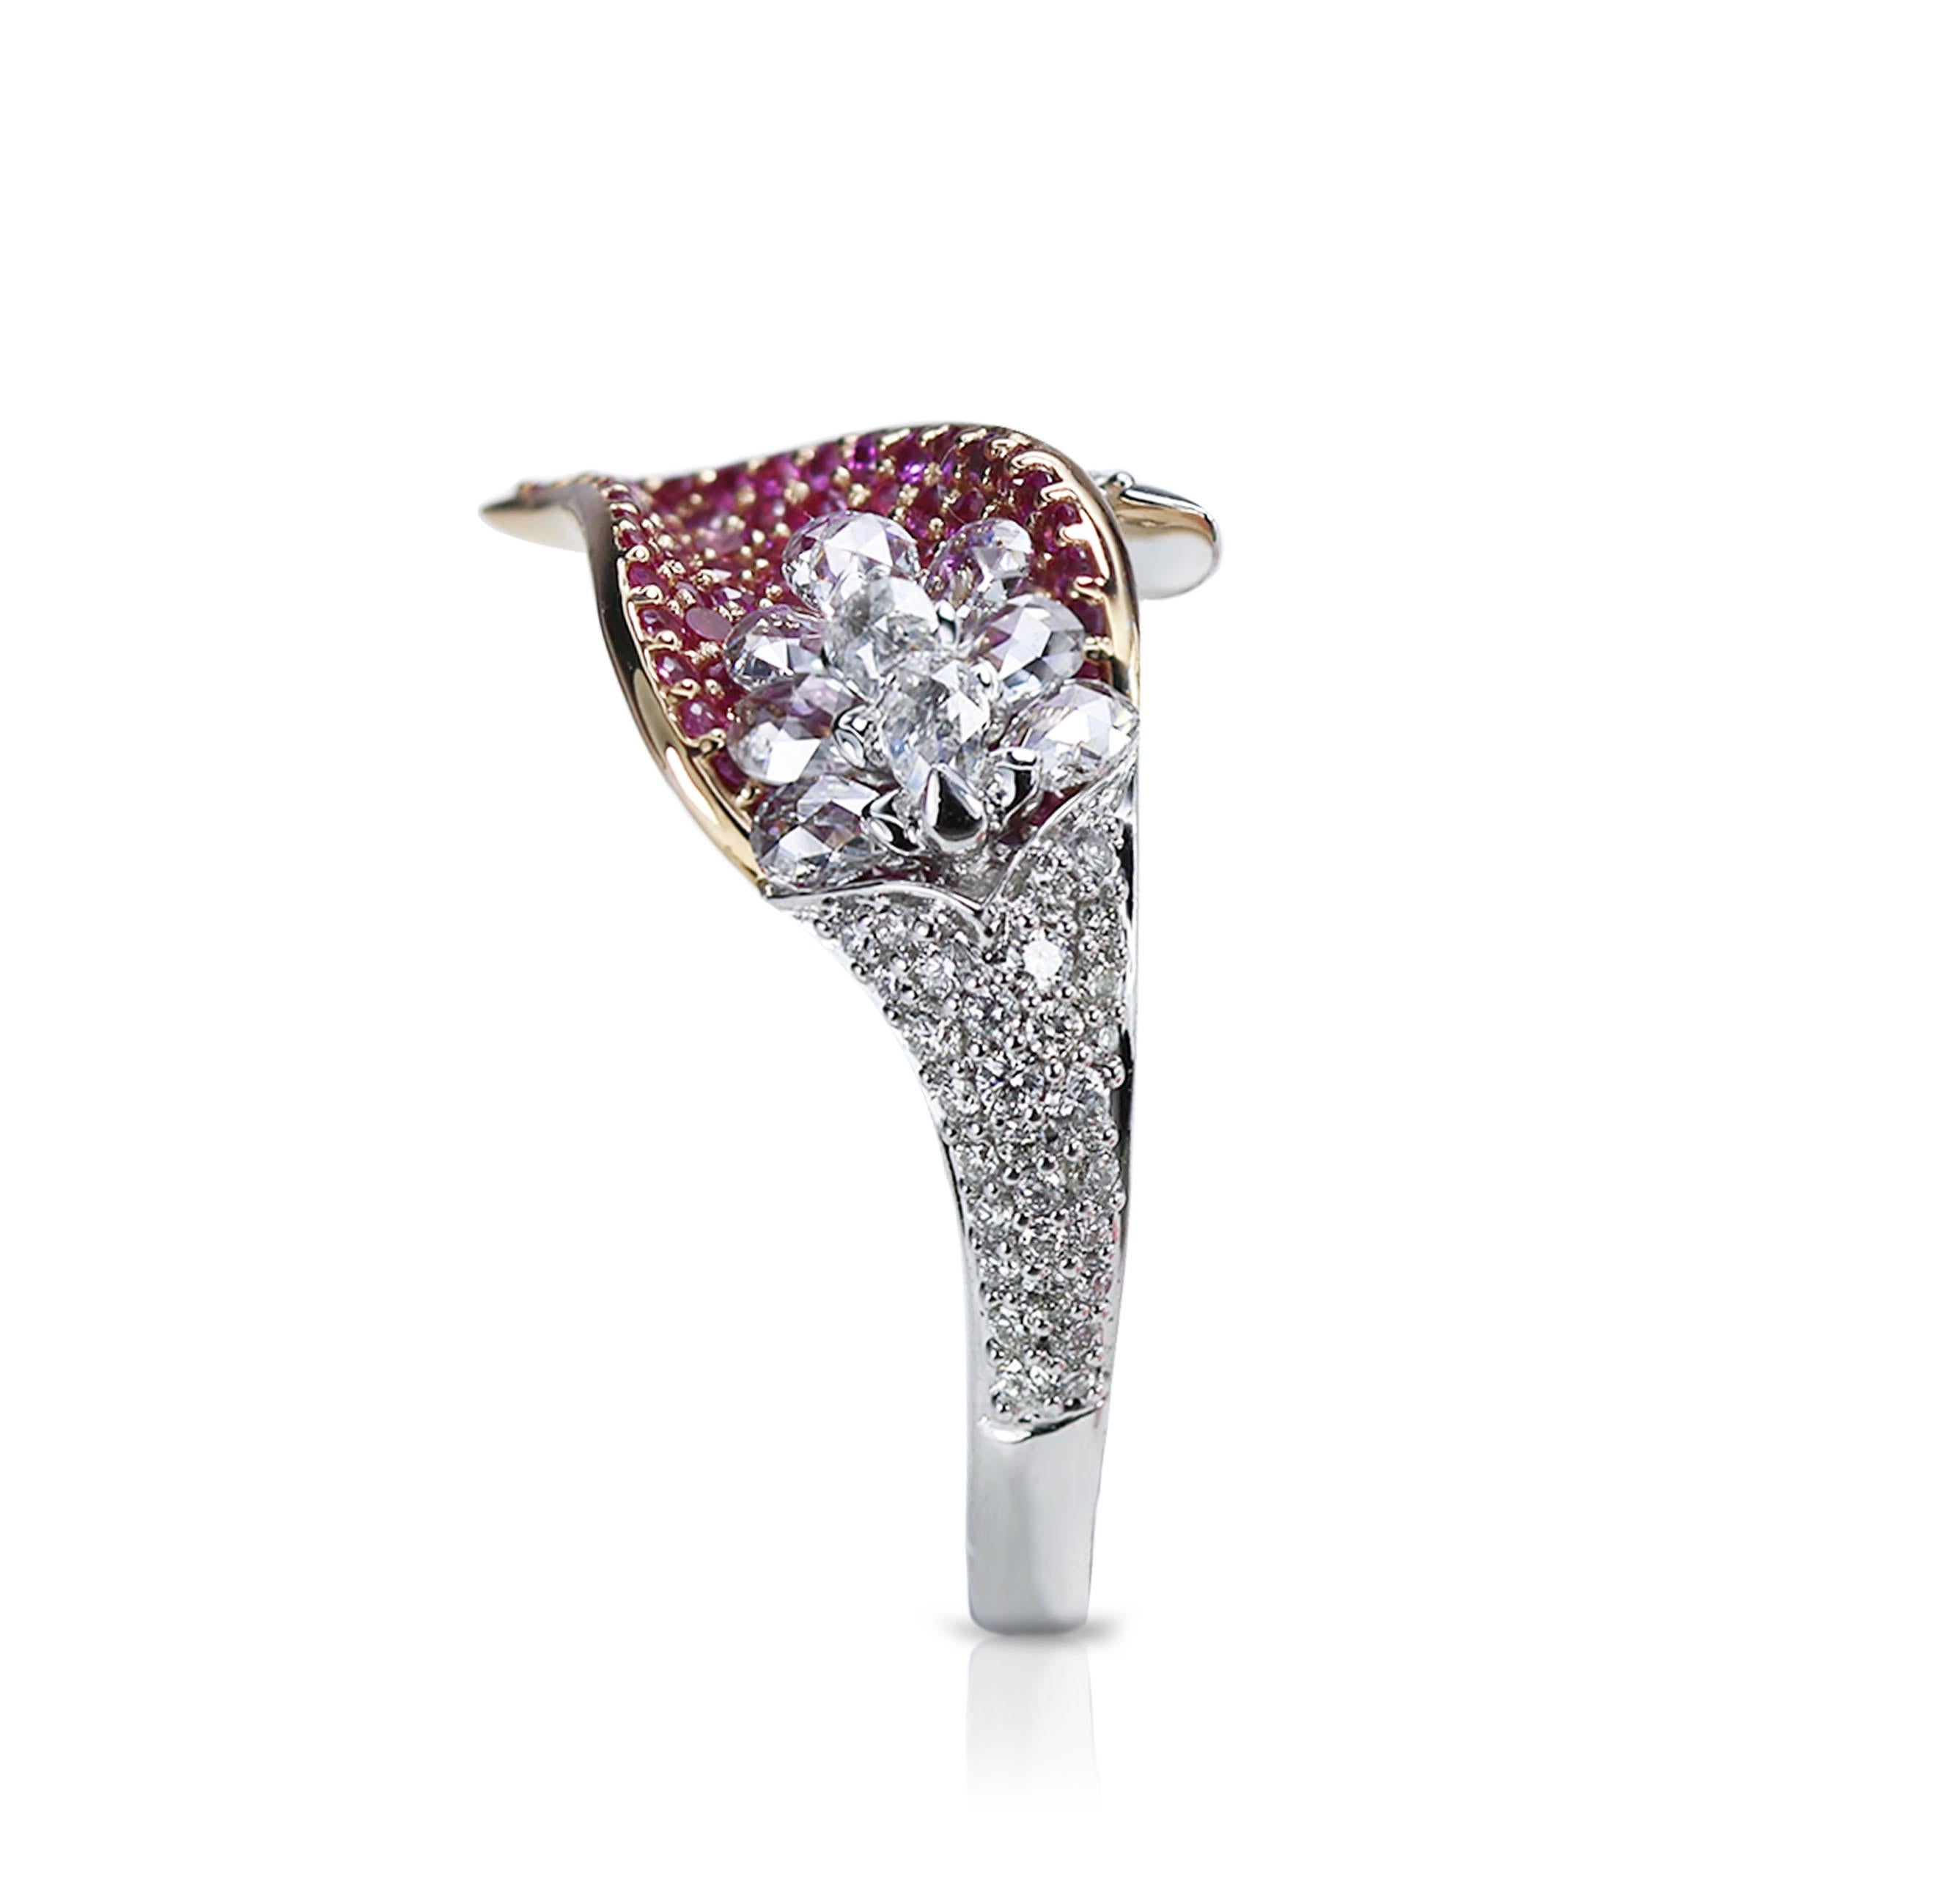 F-G-H/ VVS-VS-SI Diamond and pink sapphire ring

The design of this cocktail ring is a lesson in superior artistry. Handcrafted with F-G-H/ VVS-VS-SI pear rosecut and round brilliant cut diamonds alongside luminescent pink sapphires, it boasts a